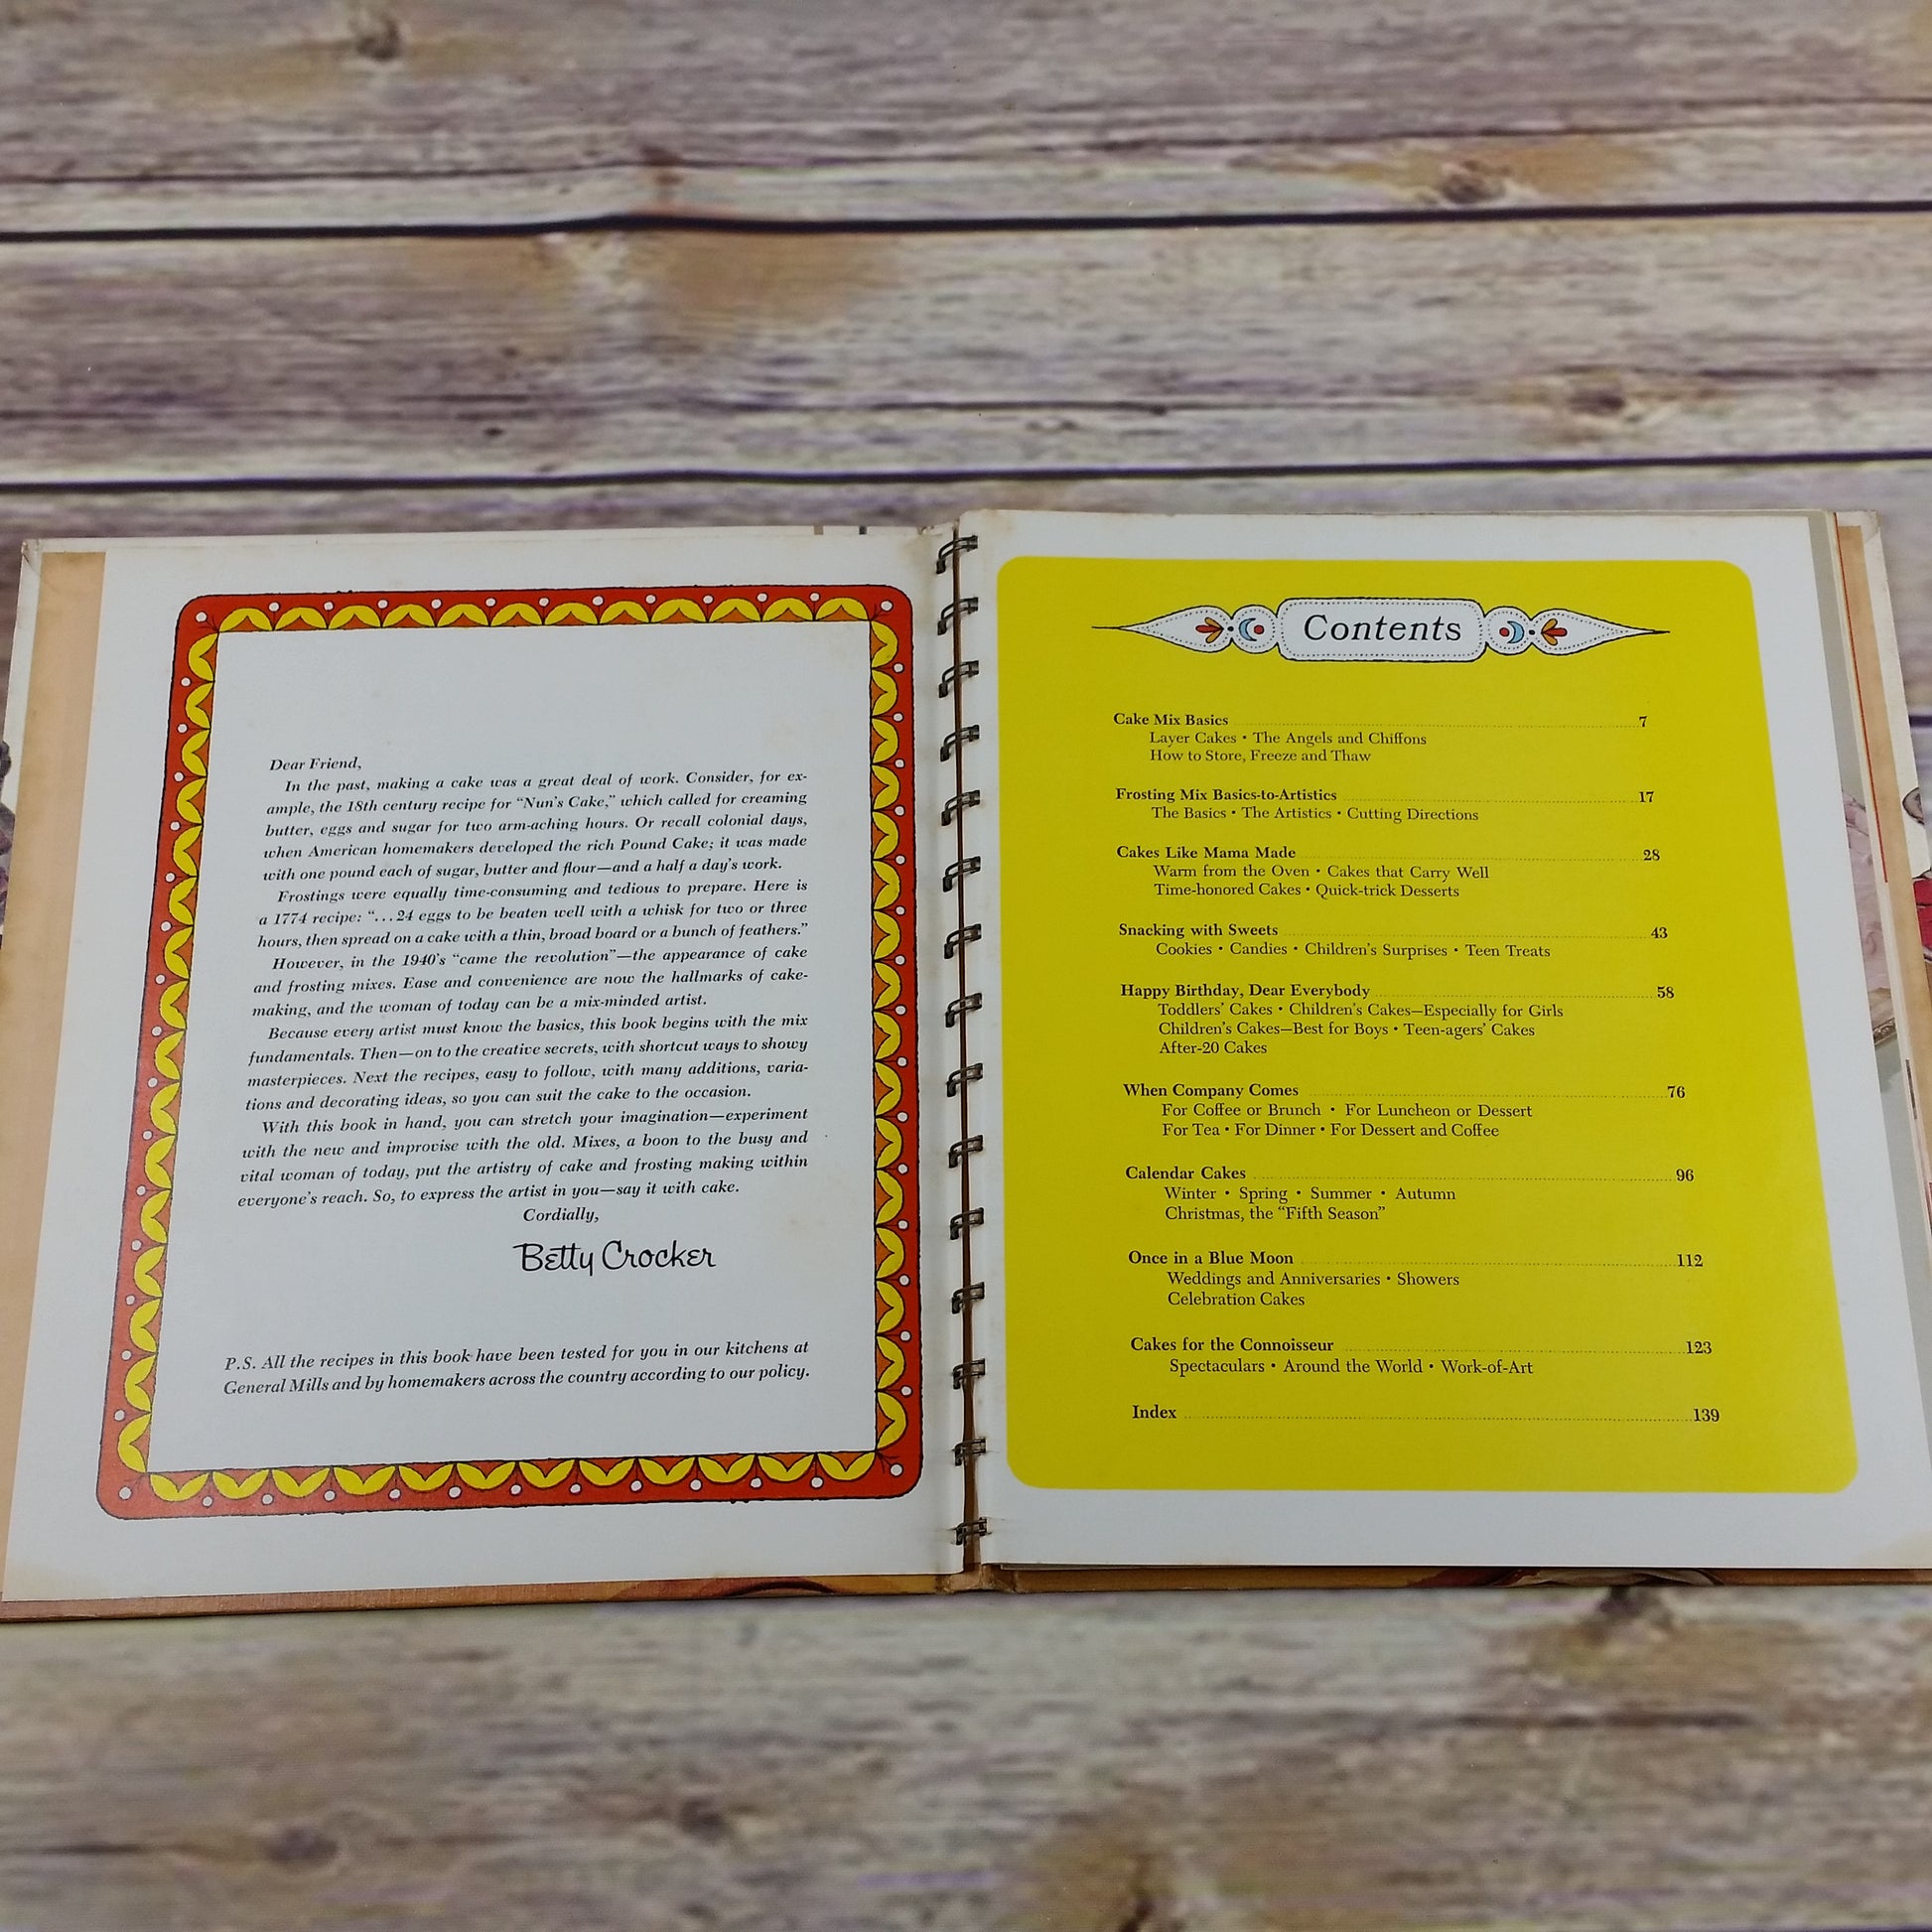 Vintage Cookbook Betty Crocker Cake and Frosting Mix 1966 First Edition First Printing Hardcover Spiral Bound - At Grandma's Table